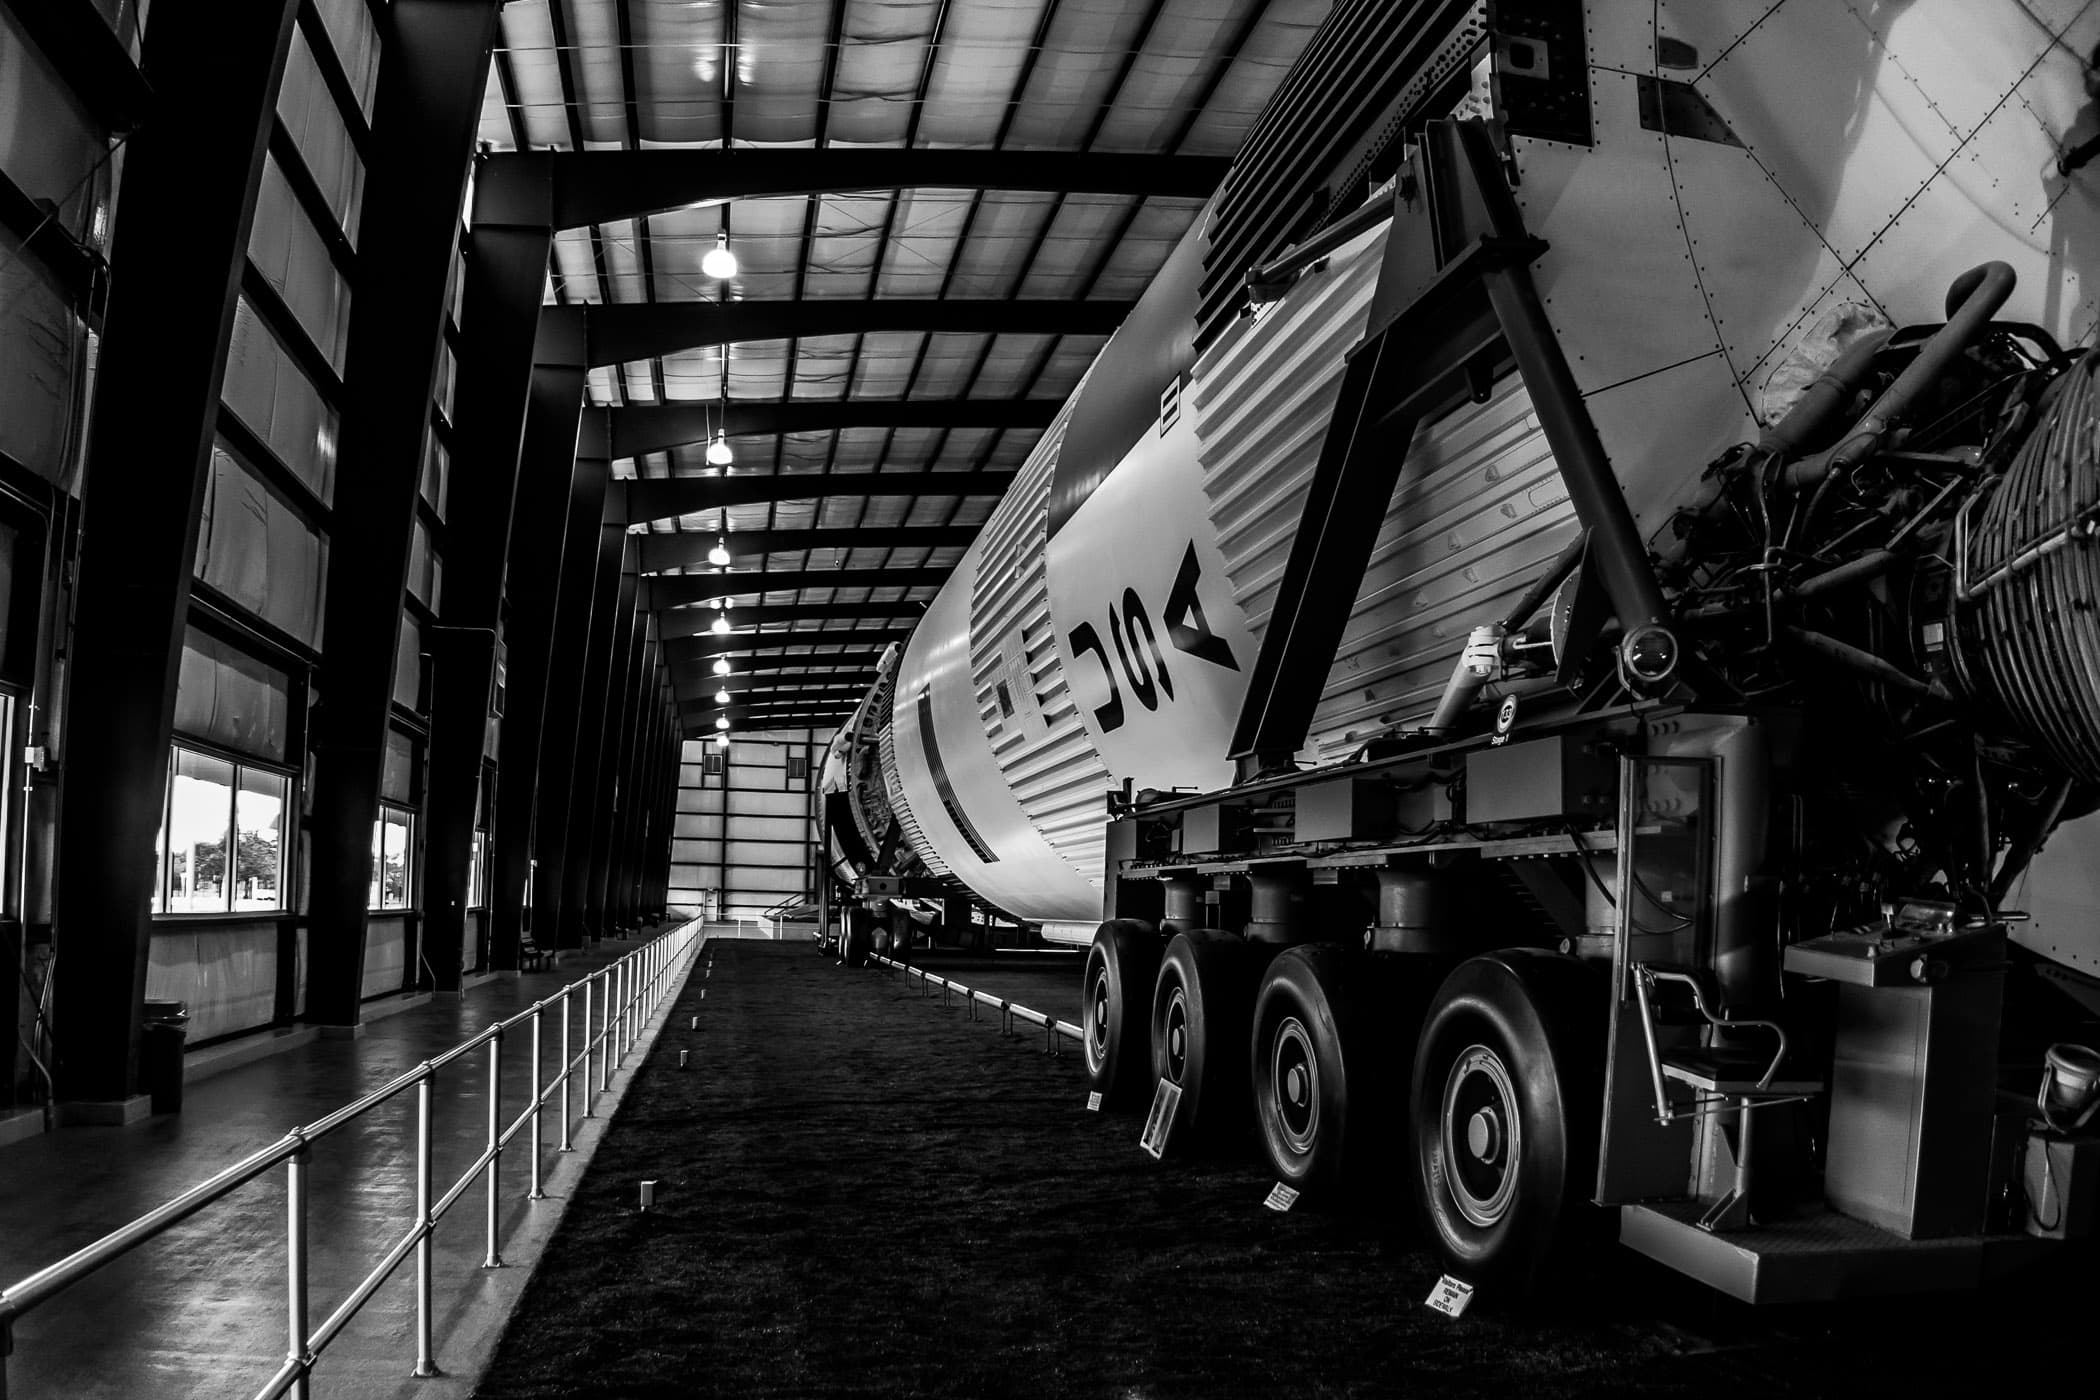 A Saturn V rocket inside a protective structure at Johnson Space Center, Houston, Texas.